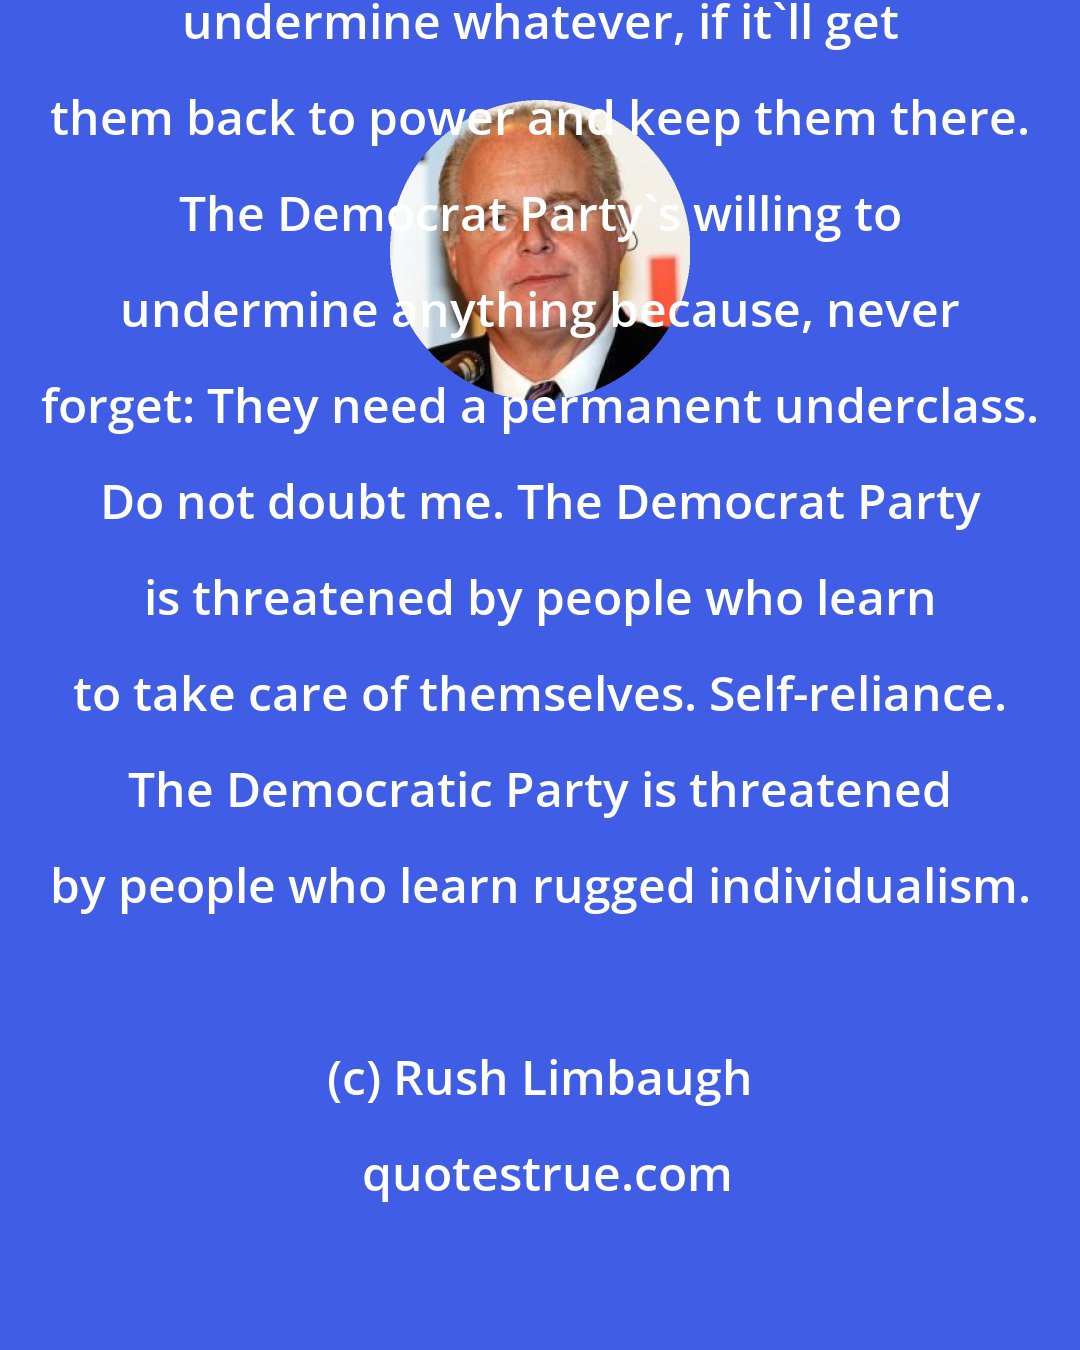 Rush Limbaugh: The Democrat Party is willing to undermine whatever, if it'll get them back to power and keep them there. The Democrat Party's willing to undermine anything because, never forget: They need a permanent underclass. Do not doubt me. The Democrat Party is threatened by people who learn to take care of themselves. Self-reliance. The Democratic Party is threatened by people who learn rugged individualism.